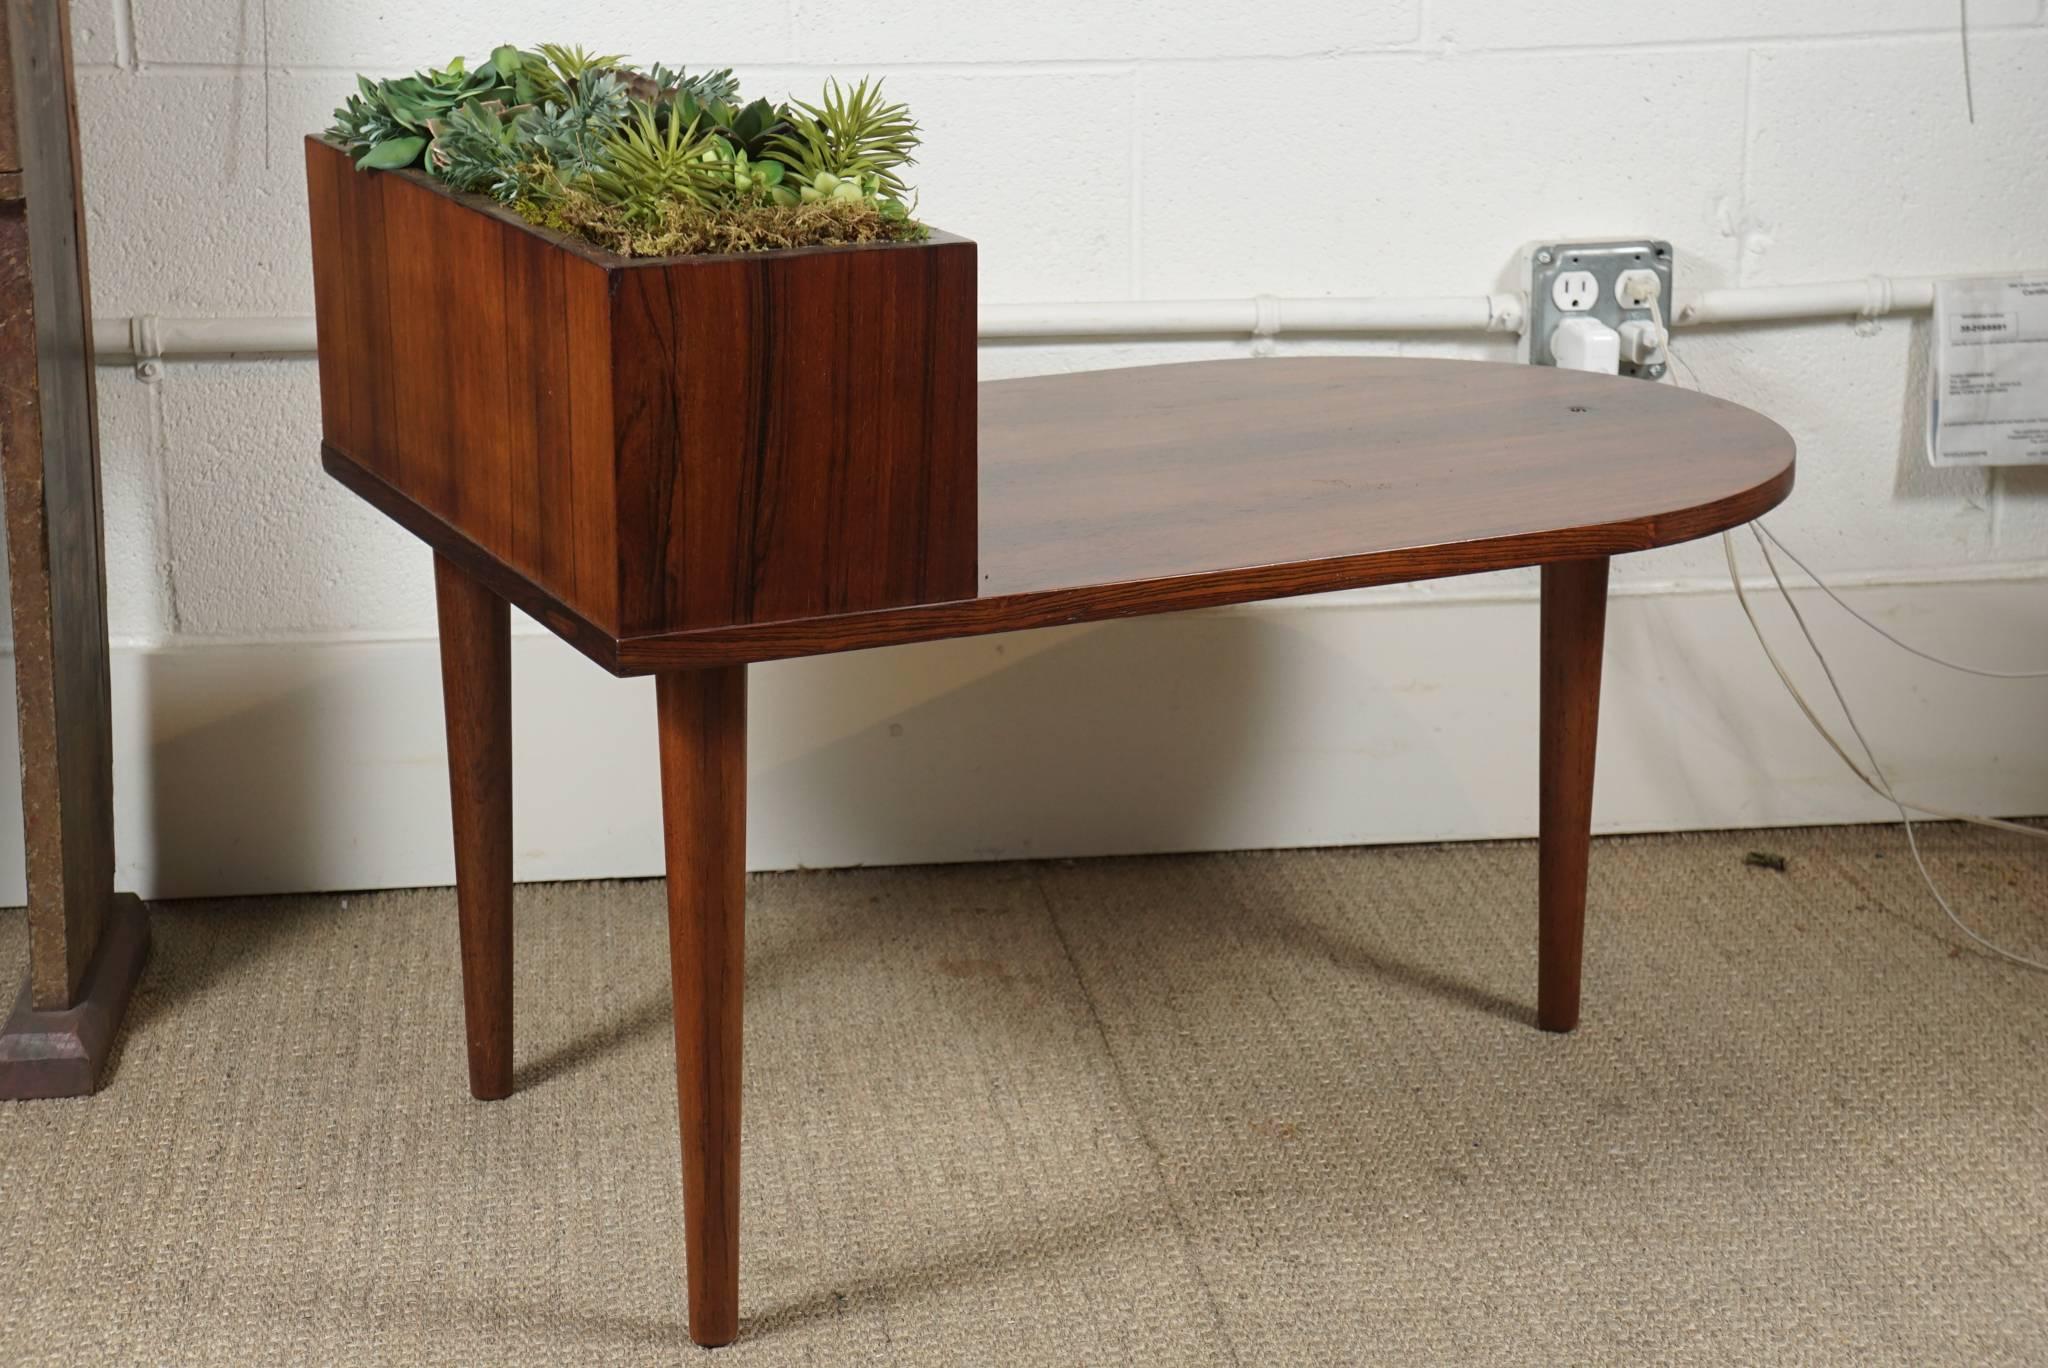 Here is a 20th century rosewood table with a zinc planter insert. The table has a tripod base and a curved front. The table has a new custom finish. The front shelf on the table is 17 inches high and the back is 24 inches high.